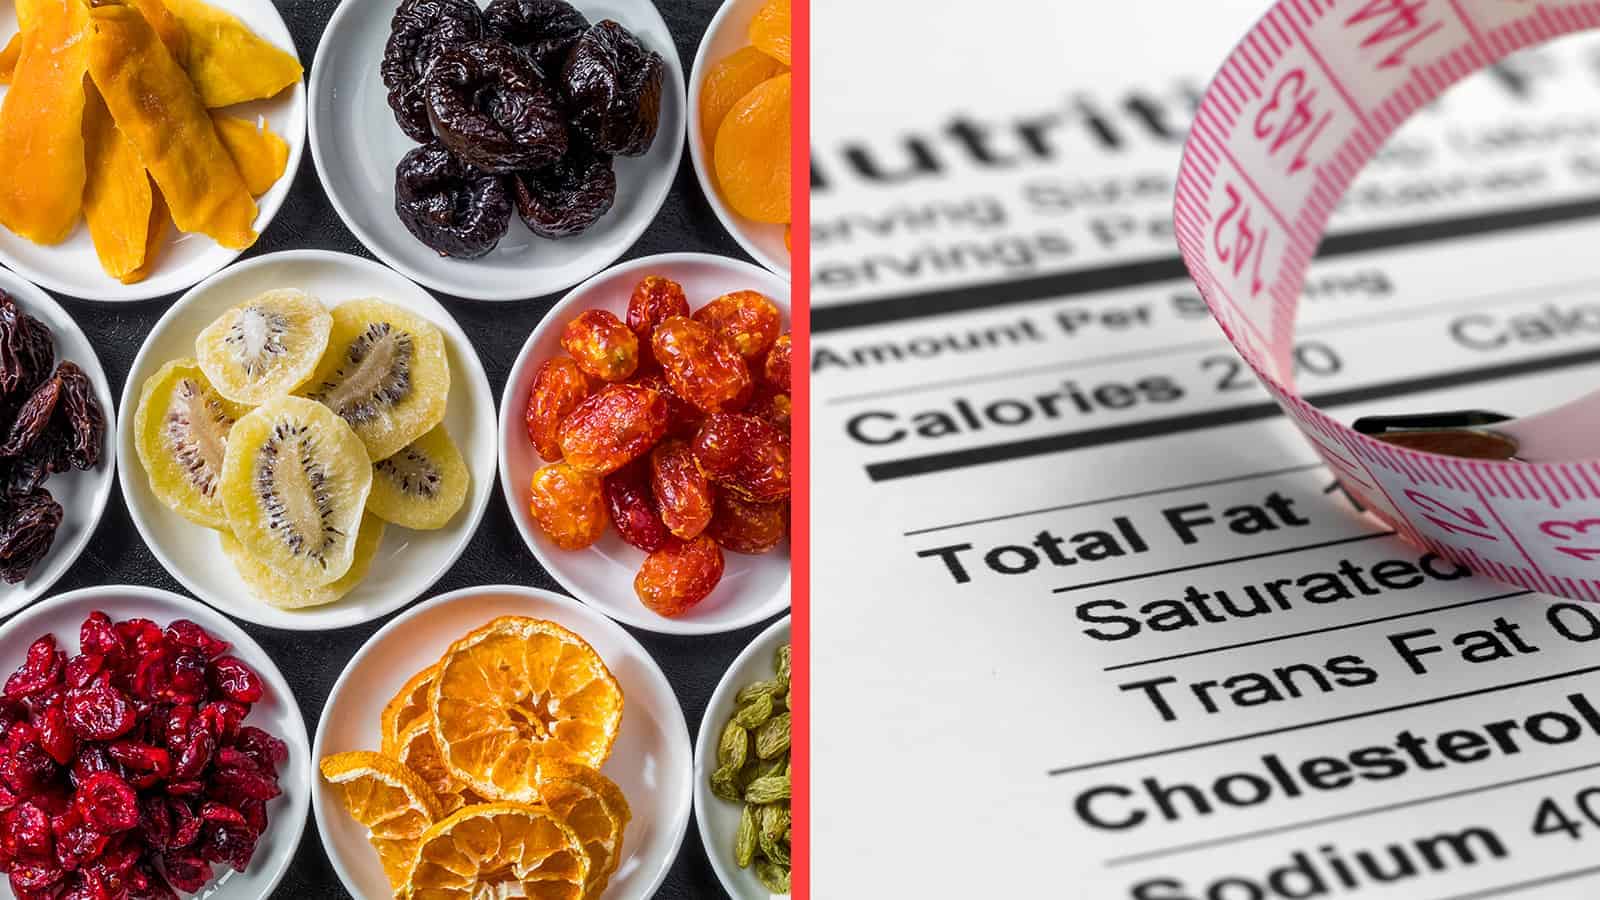 Nutritionists Explain 9 “Healthy” Foods to Avoid